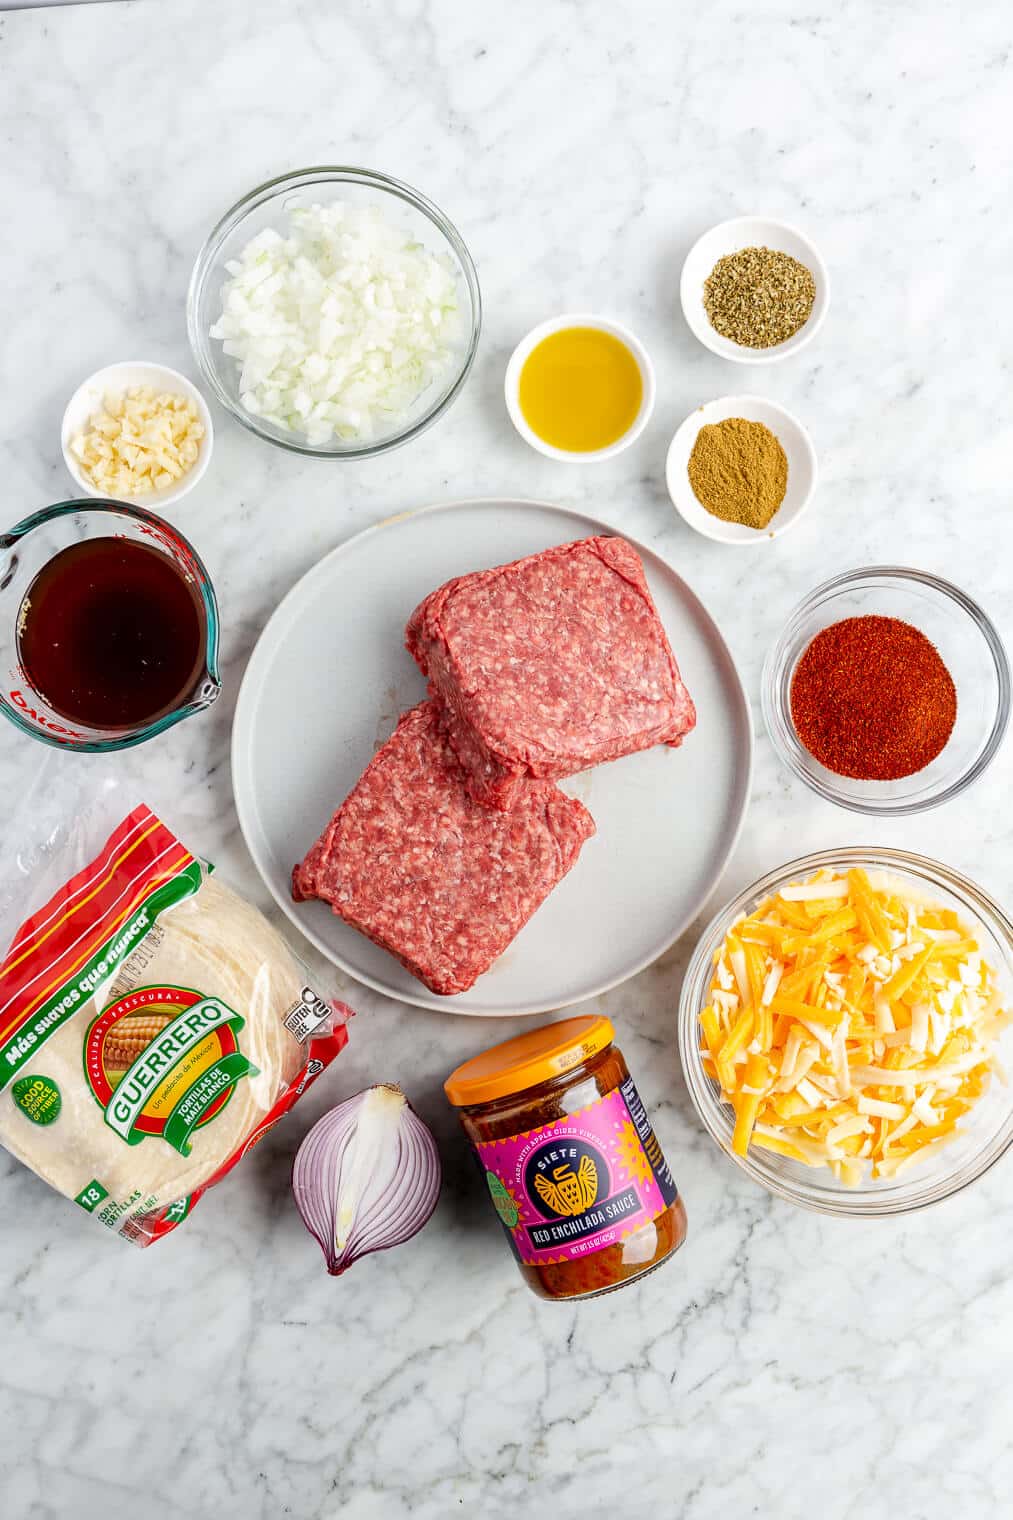 All of the ingredients needed for ground beef enchiladas on a marble surface.